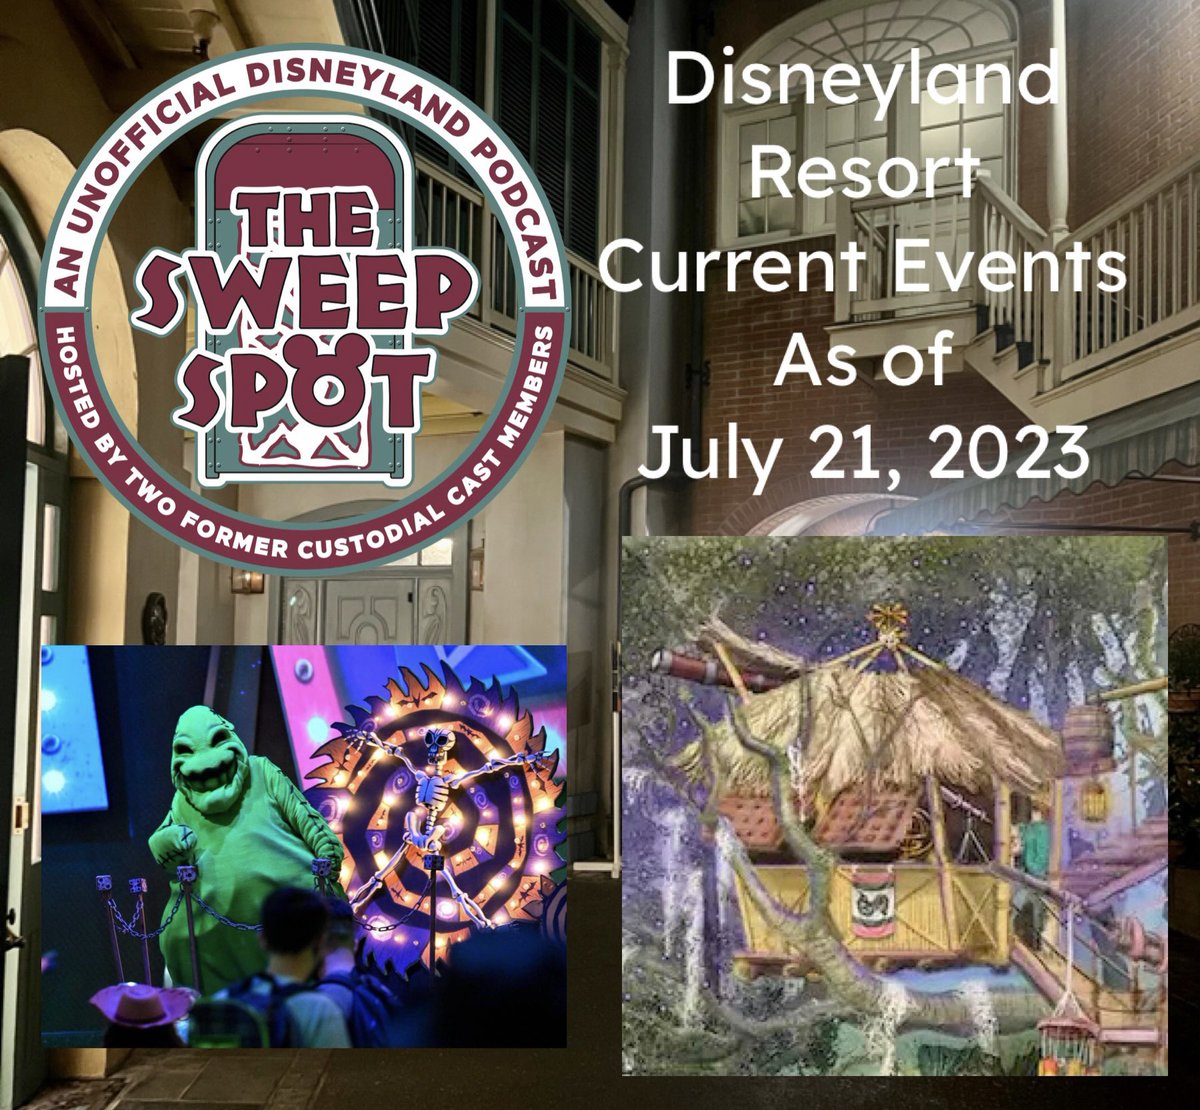 New episode of The Sweep Spot podcast is out now!! Join us this week as we discuss the latest in the Disneyland Resort News brought to you by two former Disneyland cast members #disneyland #disneylandresort #disneypodcast #disney #disneycast https://t.co/smETbj9SEG https://t.co/OgND62038W